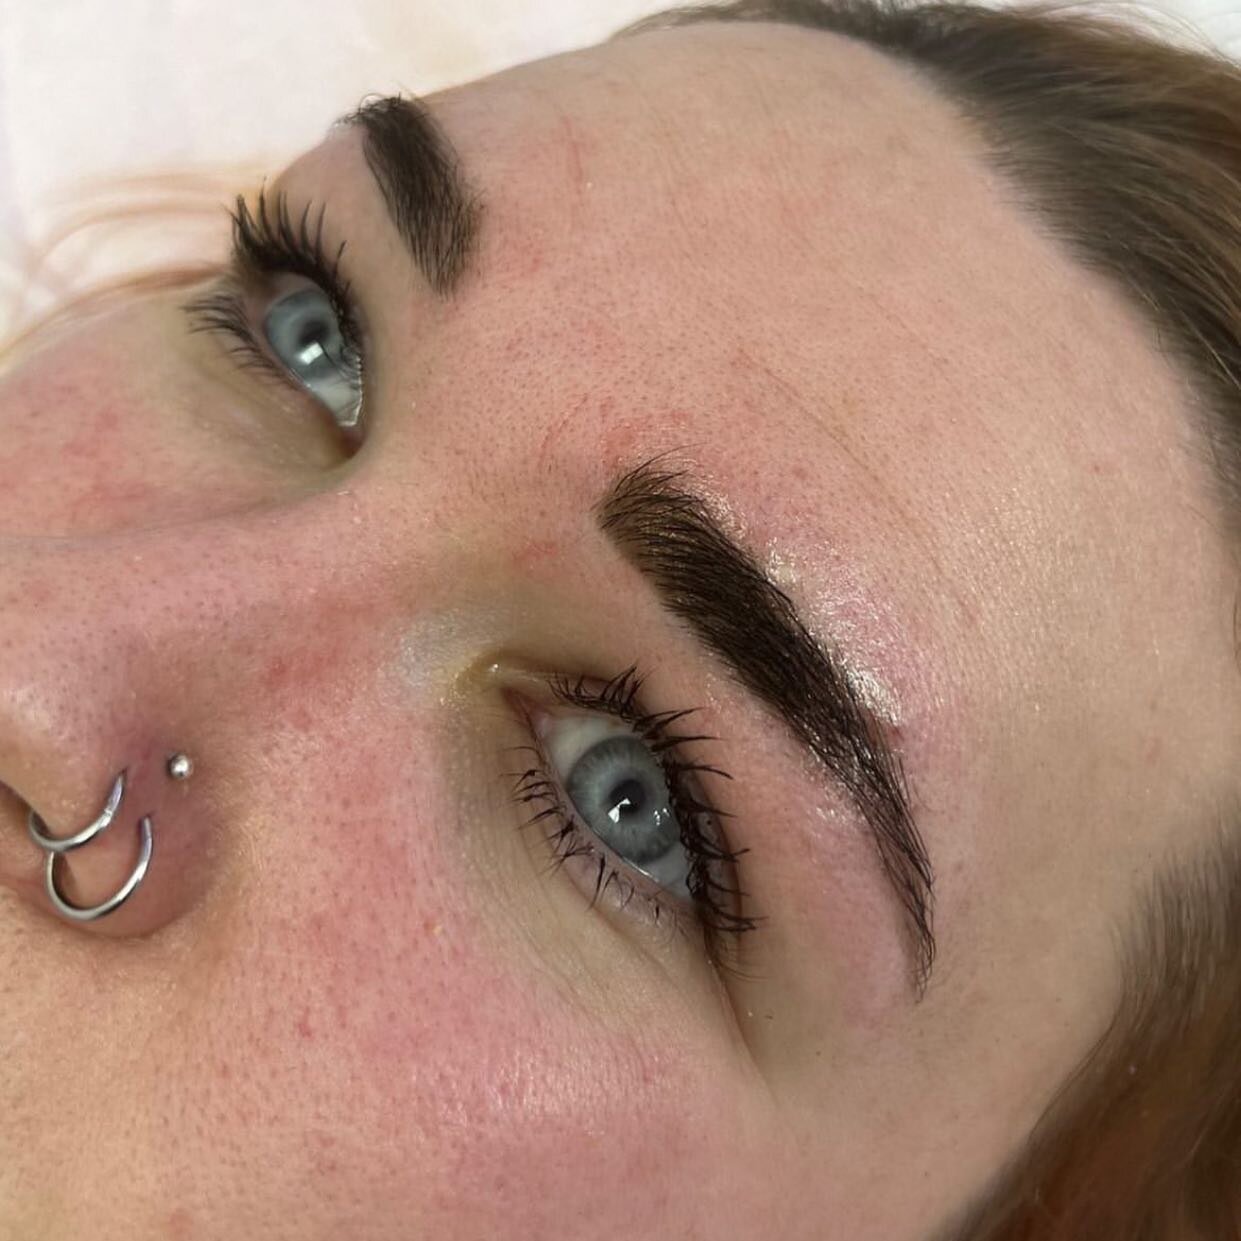 Henna brows by @metamorphicaesthetics DM her to enquire! She also offers hifu treatments, laser hair removal and more! #henna #hennabrows #browsonfleek #browsonpoint #like #follow #love #beauty #beautytreatments #eyebrows #eyebrowsonfleek #eyebrowson